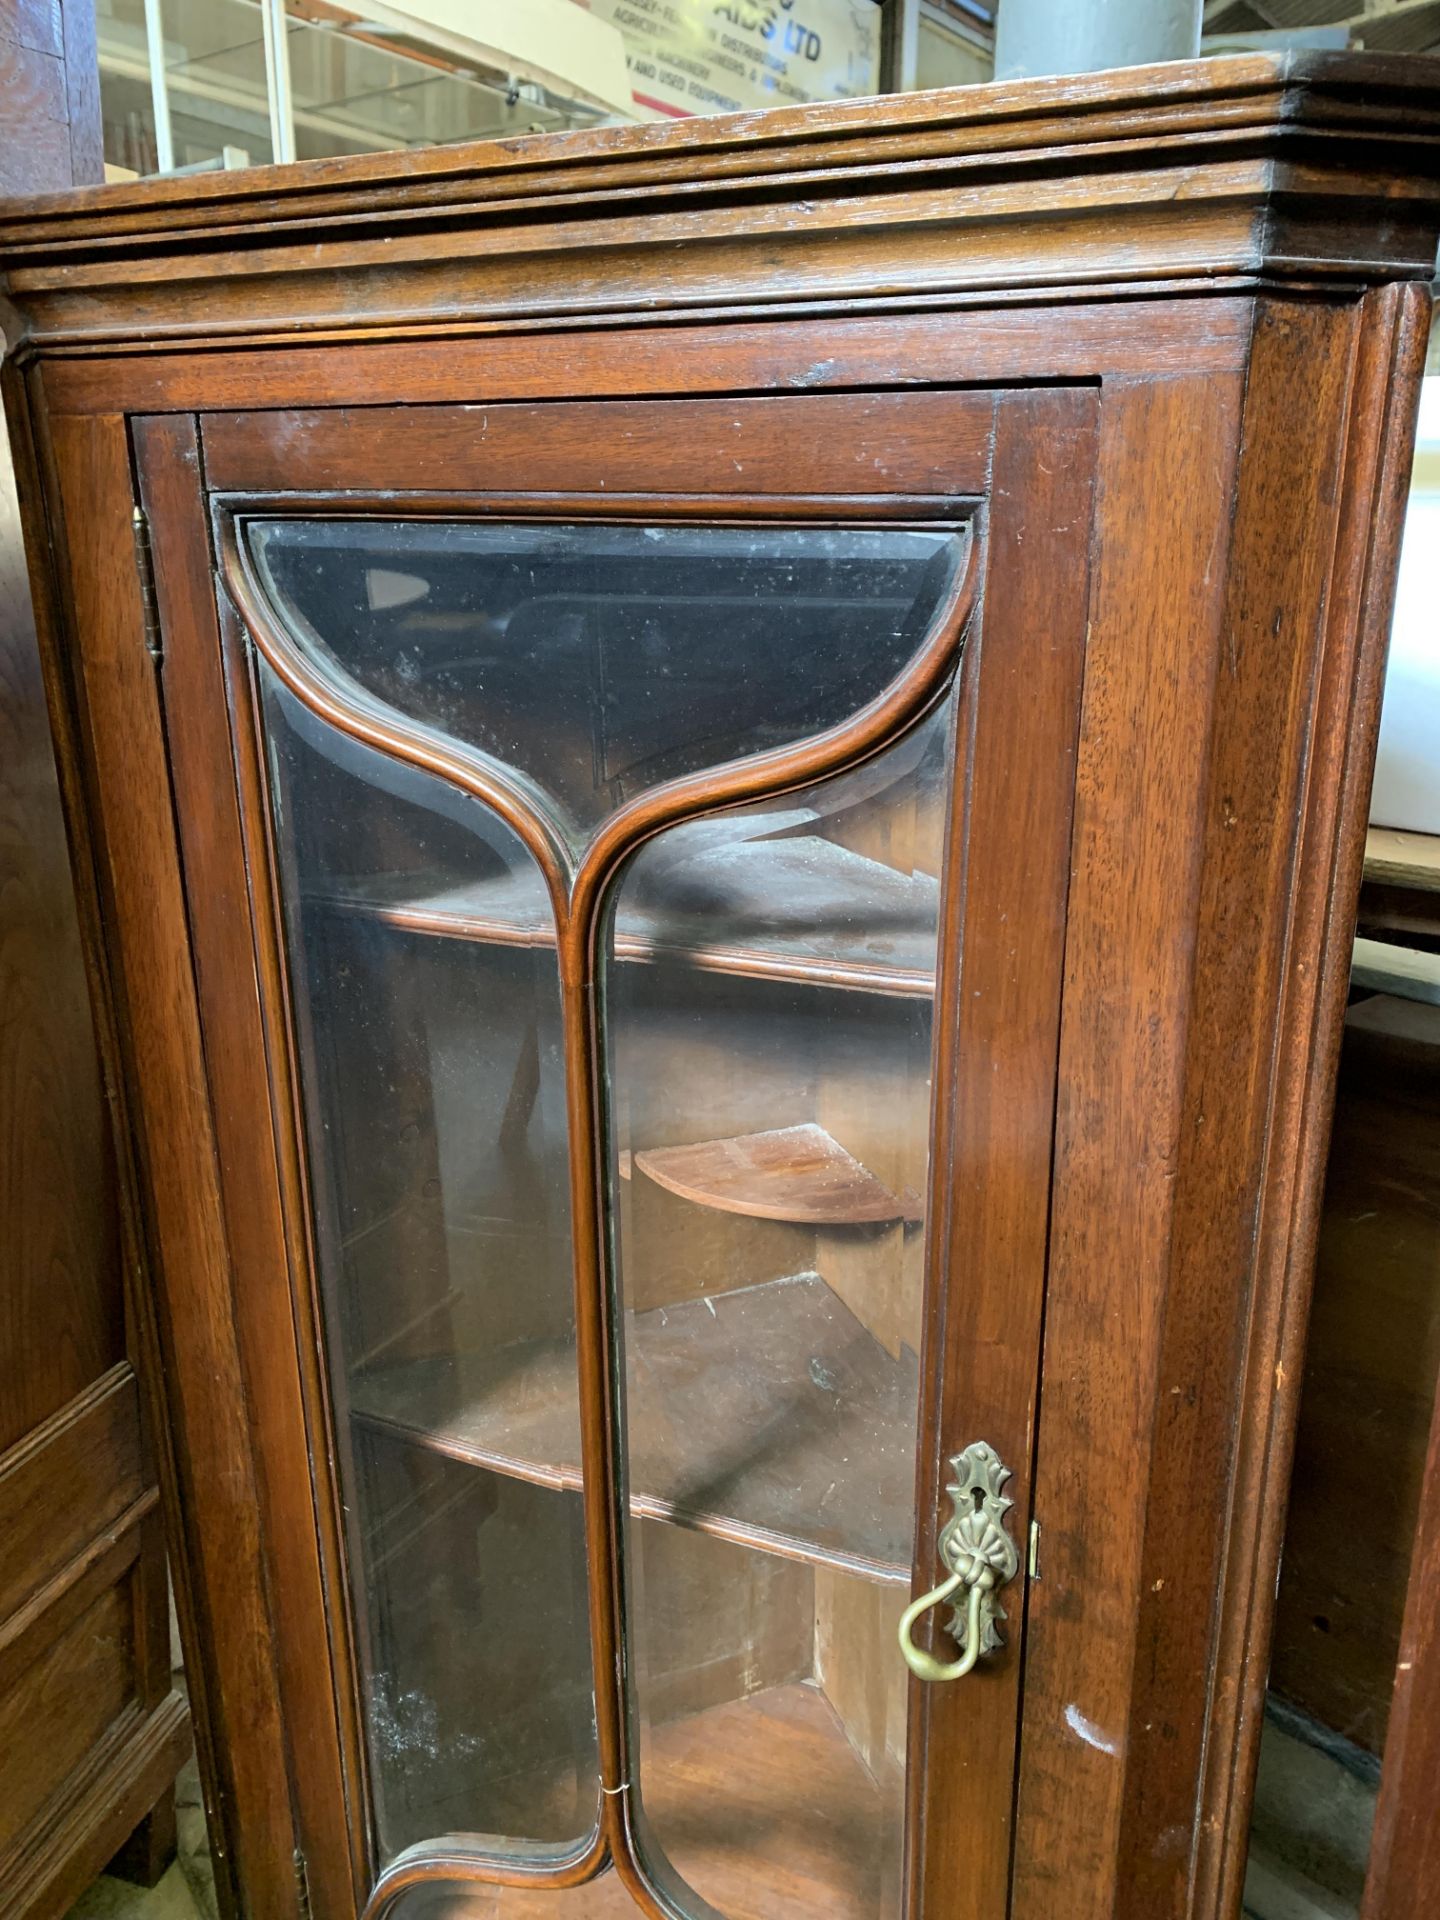 Mahogany bevelled glass fronted wall mounted corner cabinet - Image 3 of 4